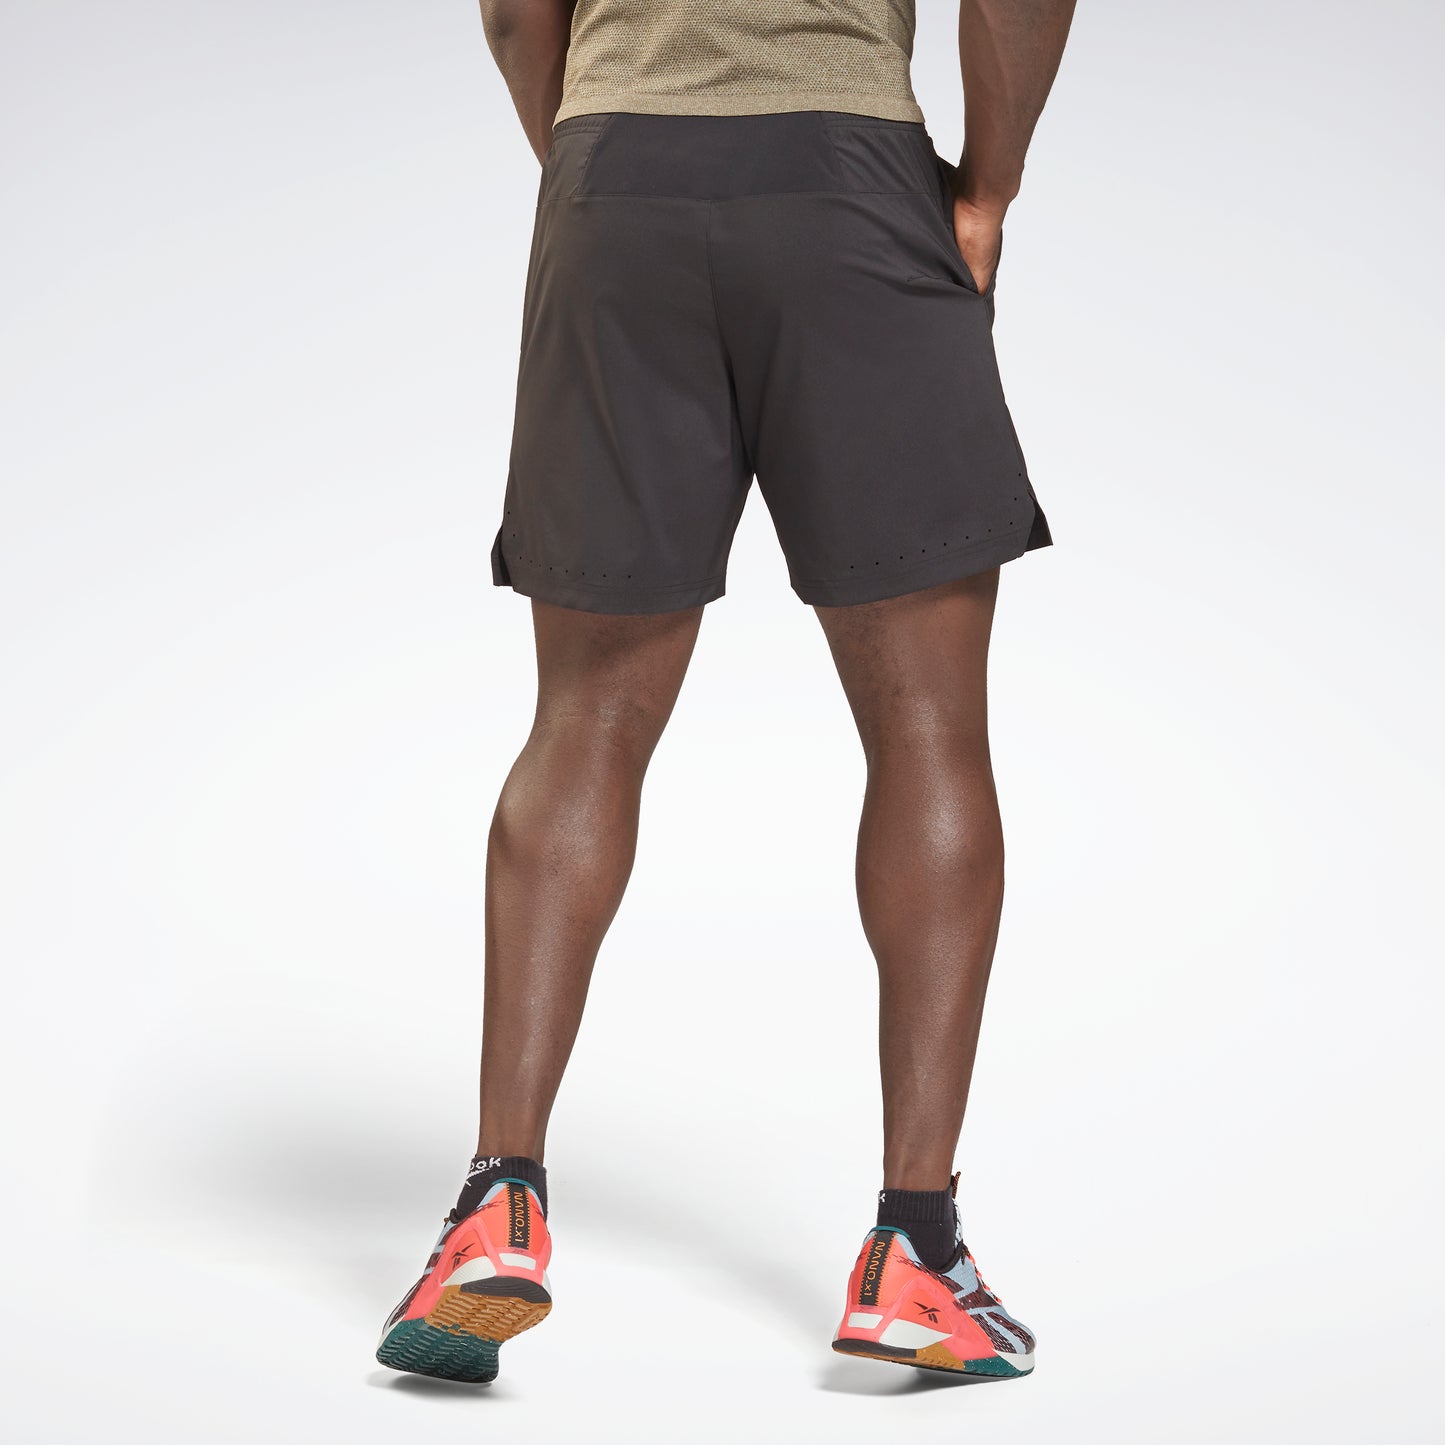 United By Fitness Epic+ Shorts Black